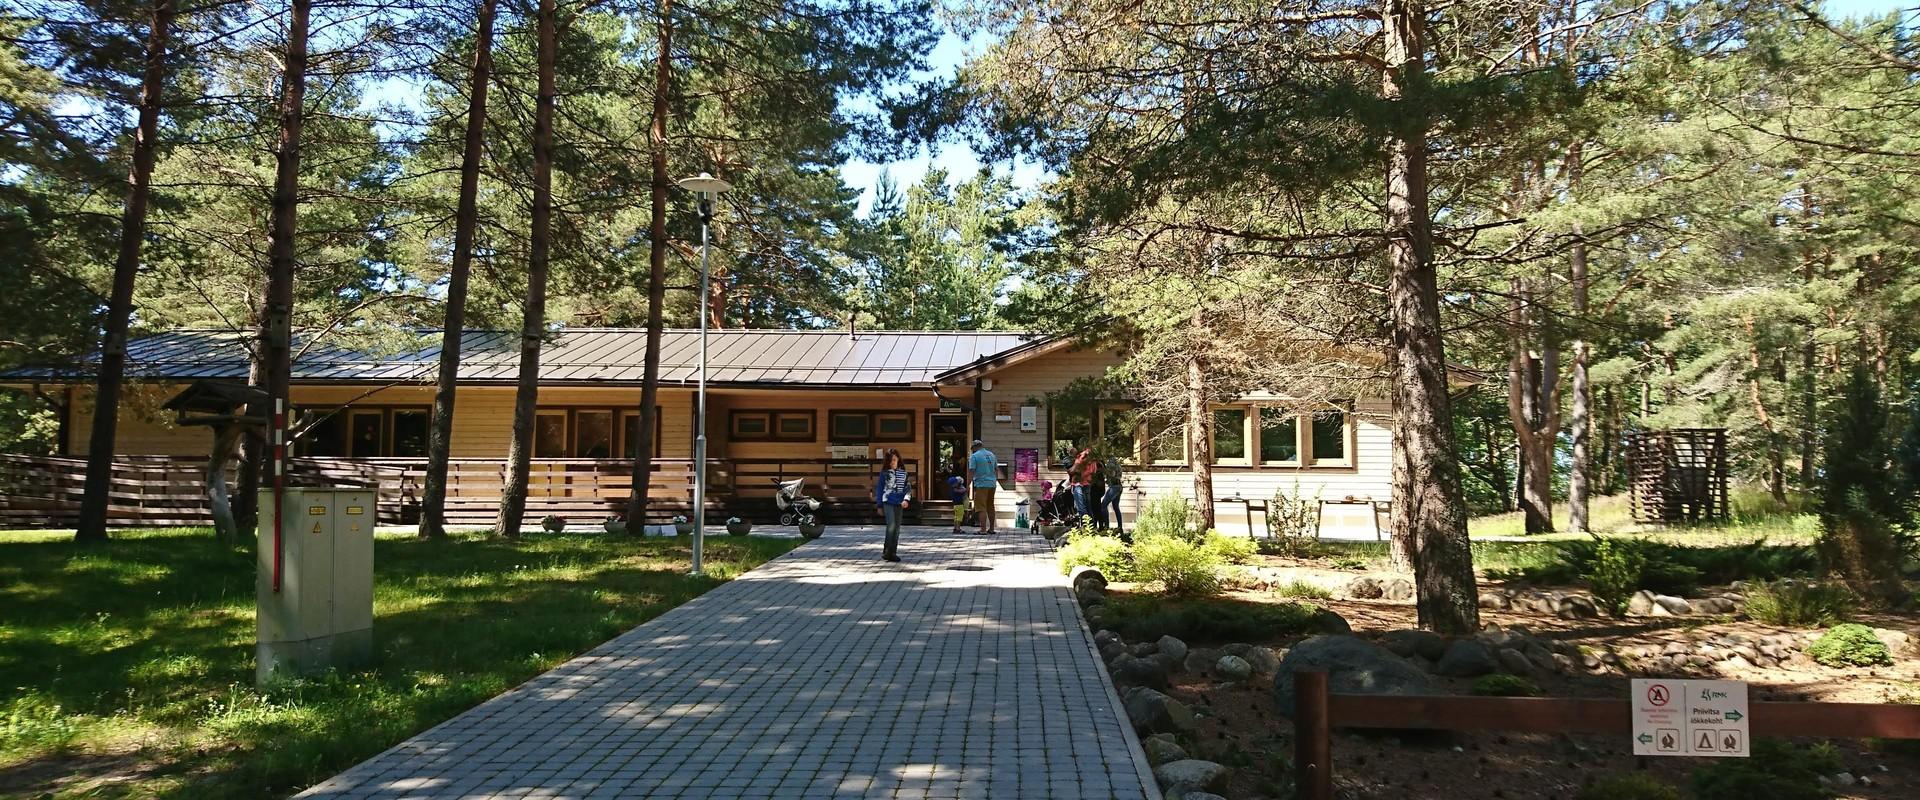 At Kabli Nature Centre, you can find useful information about the natural values of the region and the holiday options offered by the State Forest Man